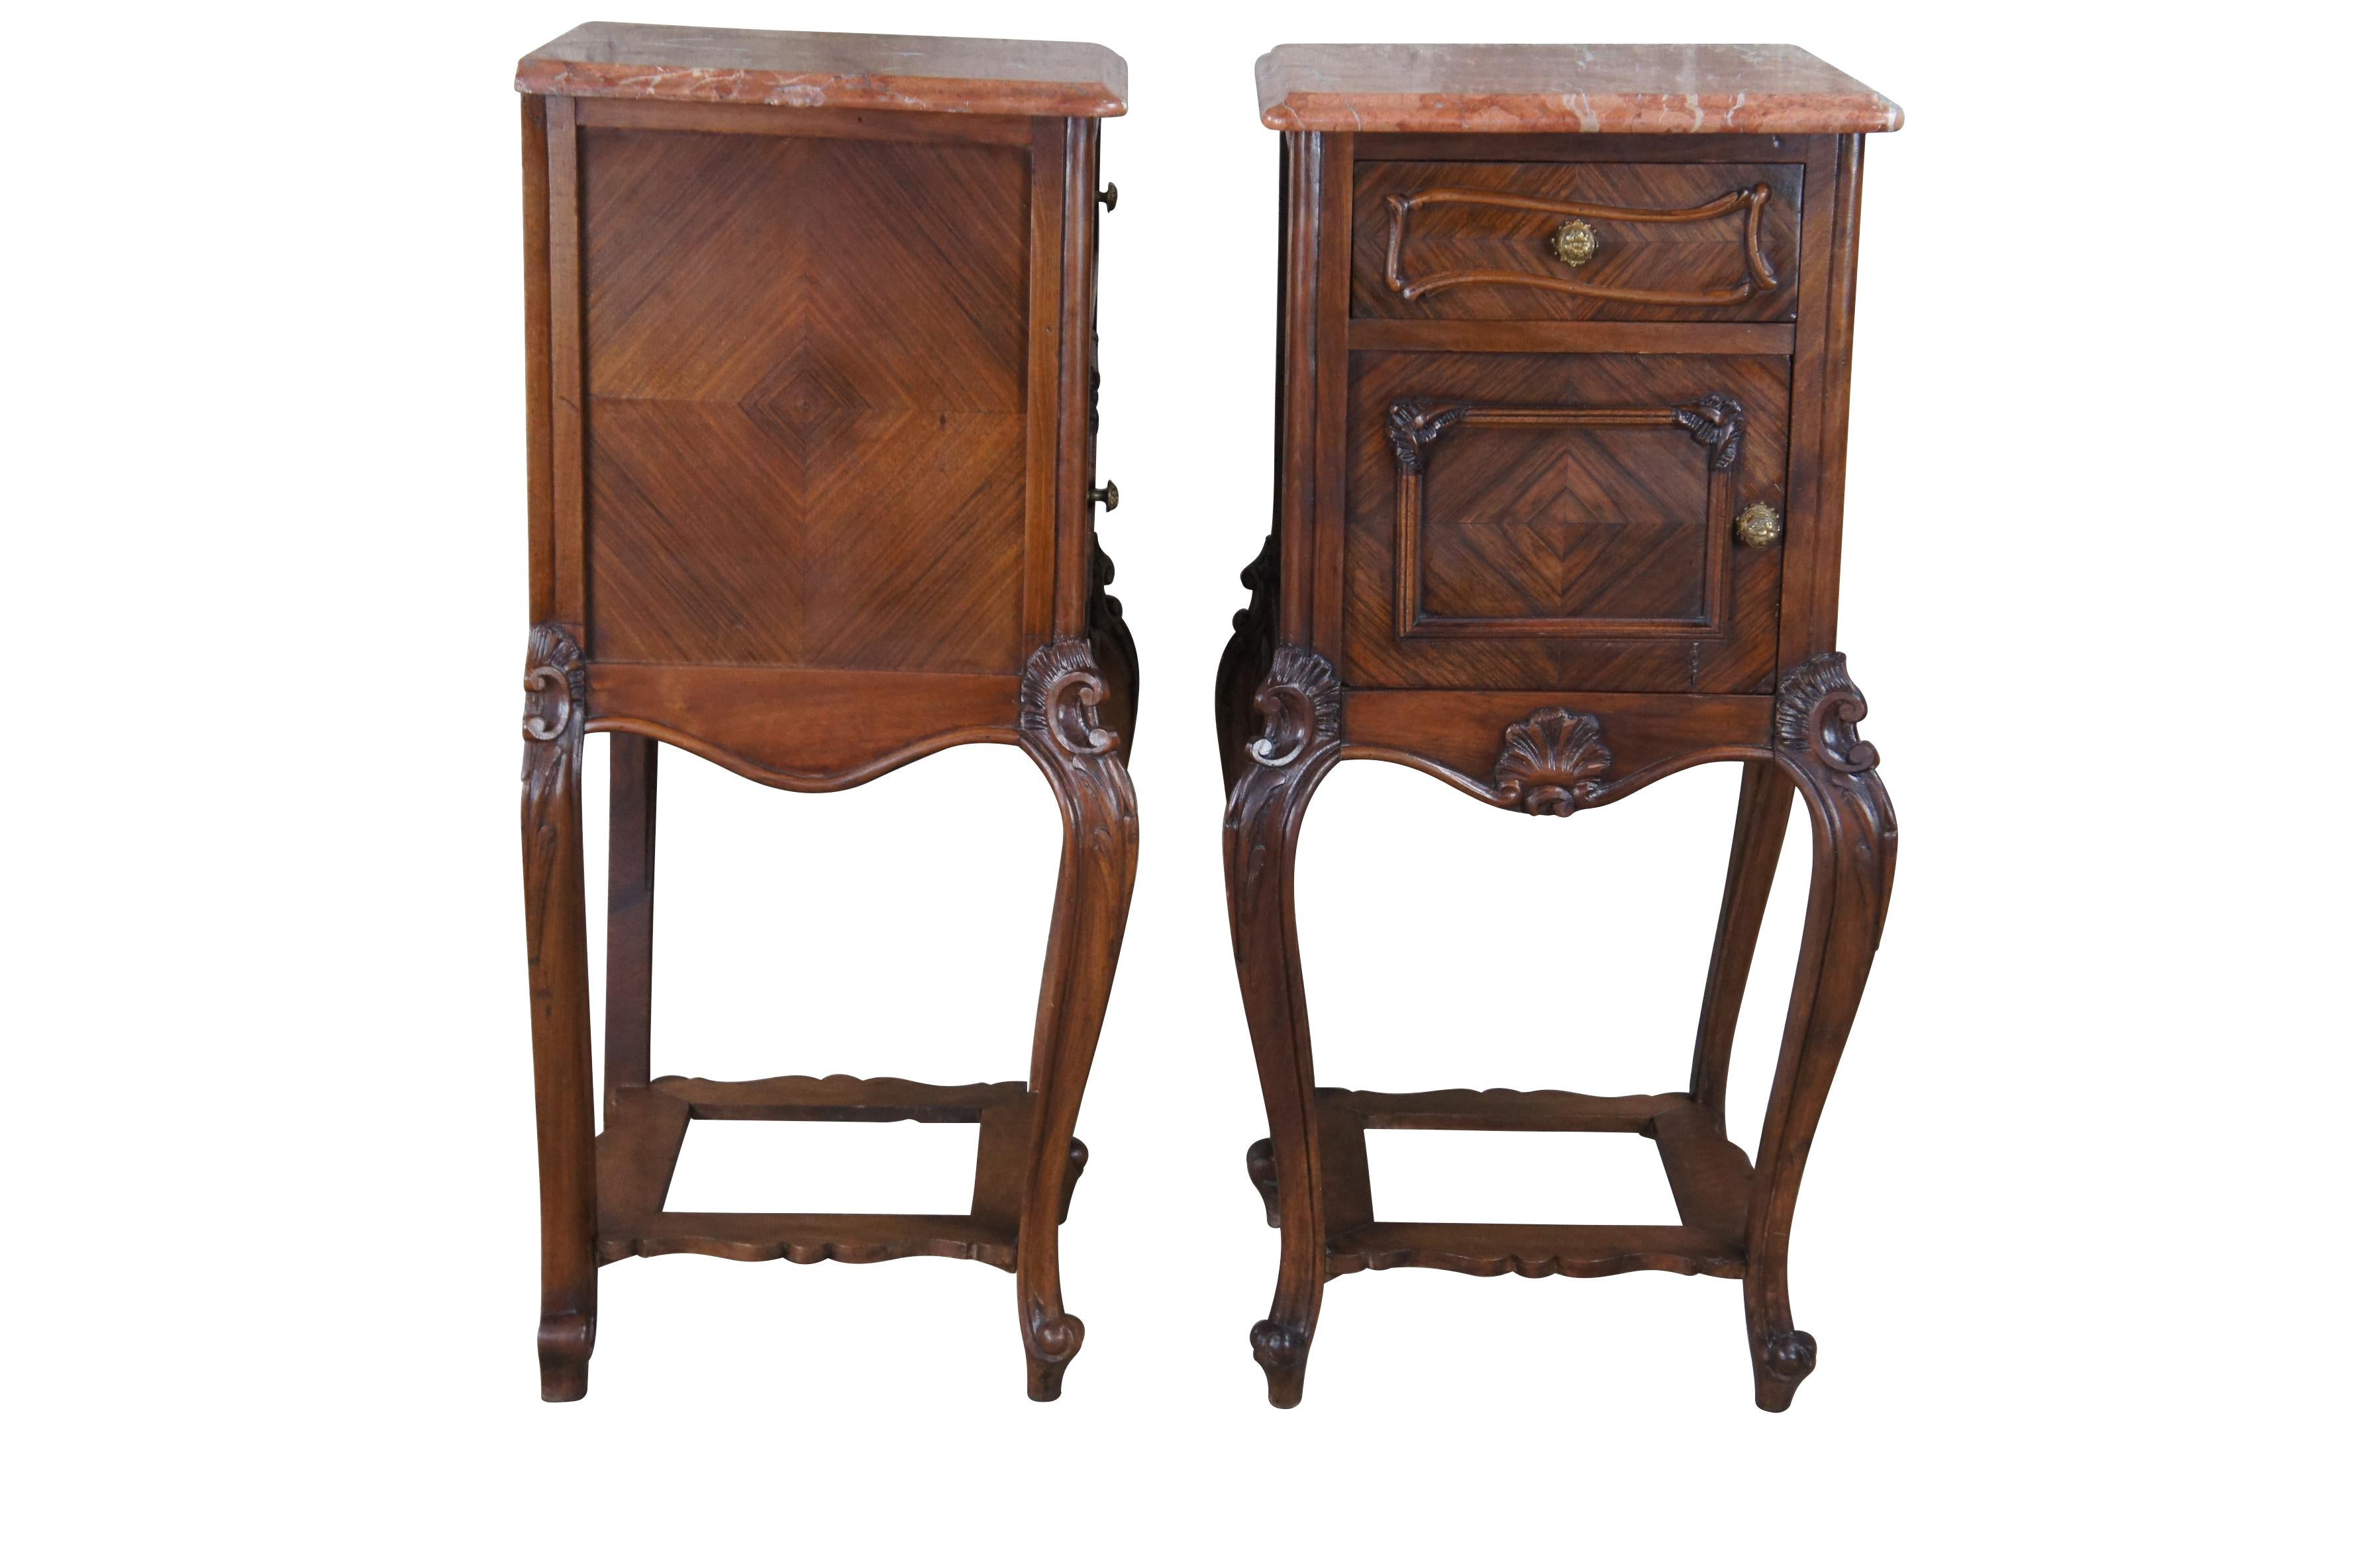 Two antique French tobacco humidor / smoke stands.  Made of matchbook walnut featuring a two tiered serpentine design with marble top, paneled door and cabinet, and cabriole legs.

Dimensions
16